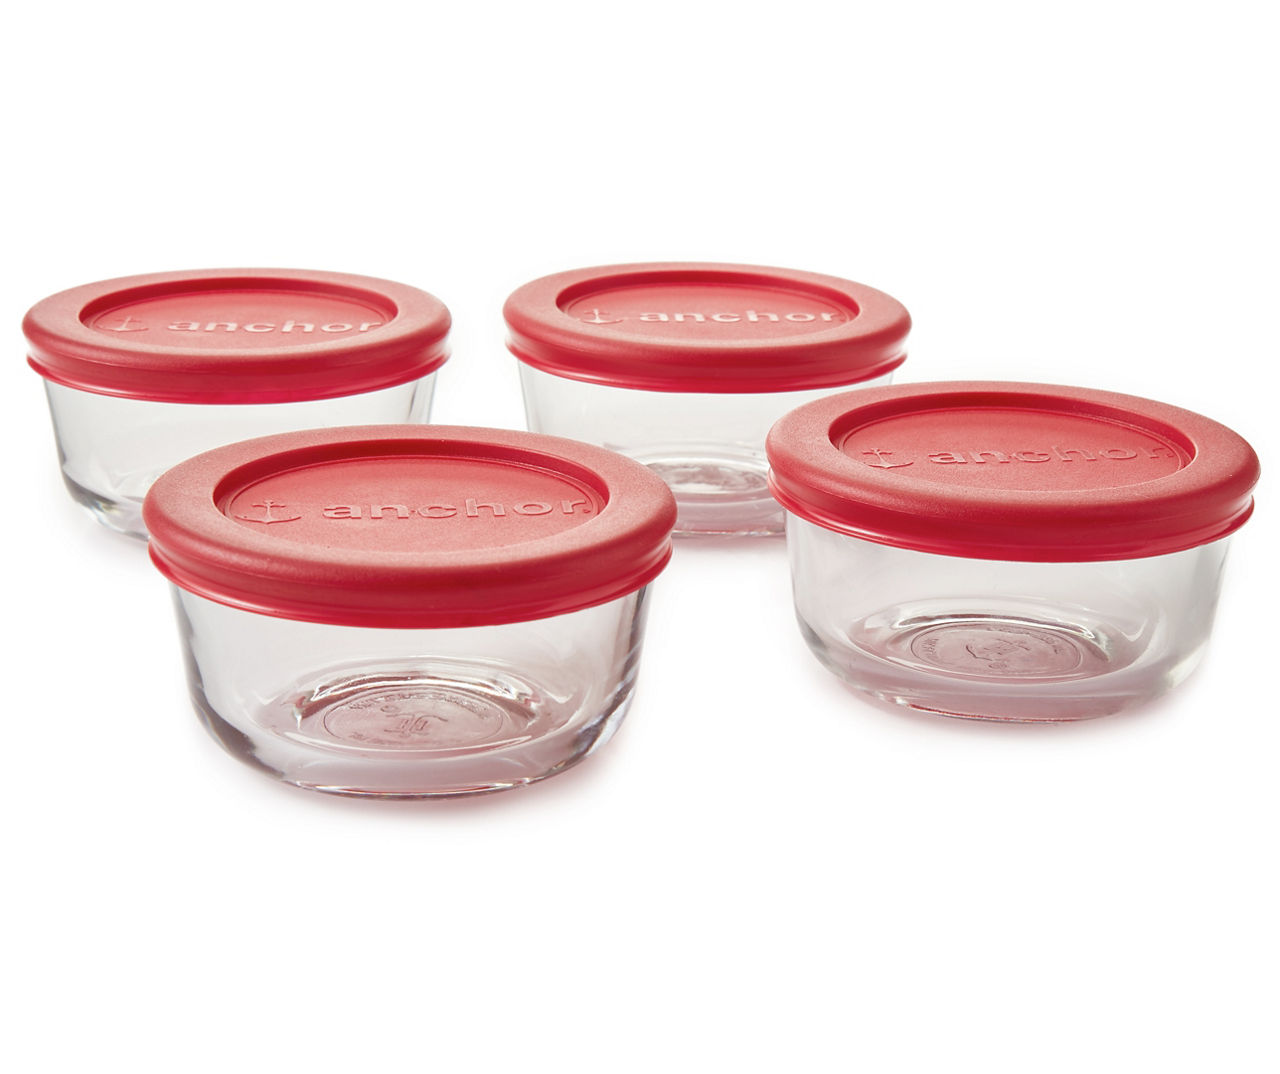 PYREX Glass 8 Cup Measuring Cup Bowl w/ Red Lid Freezer Oven